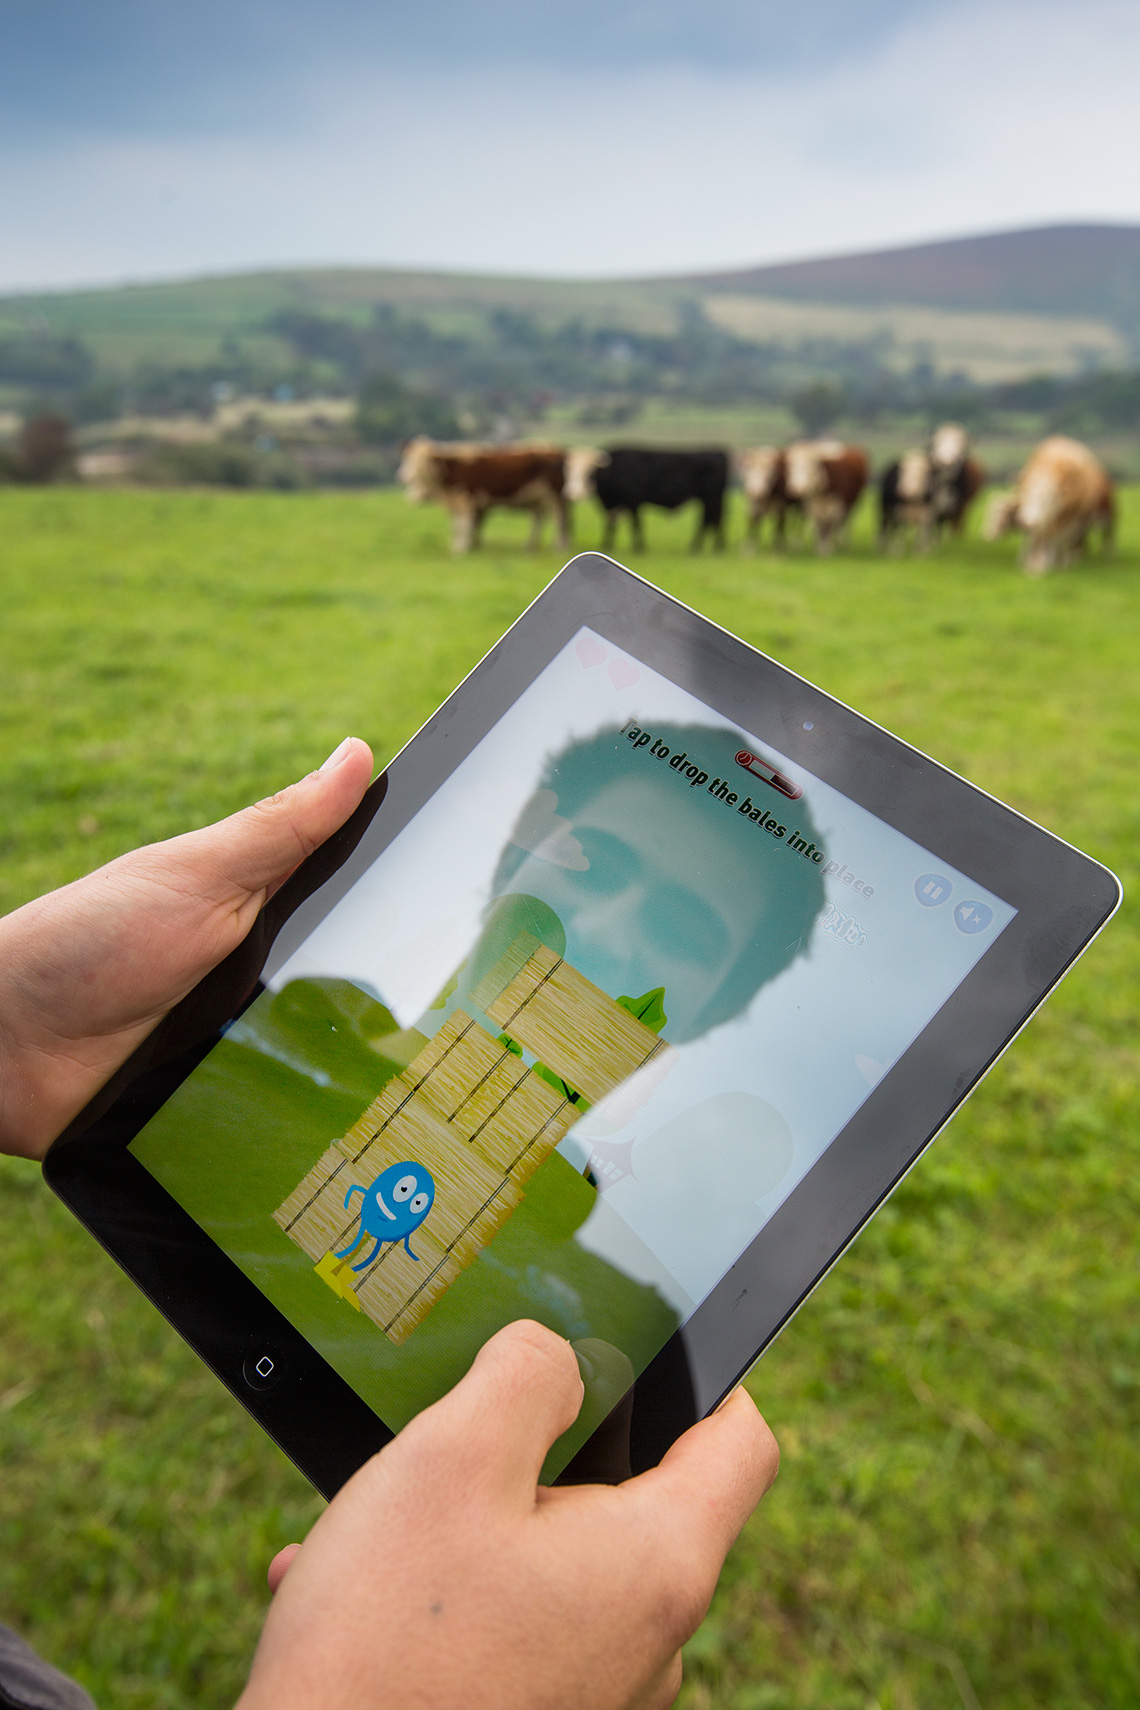 Editorial Photography of a dairy farmer playing an iPad game in a field.